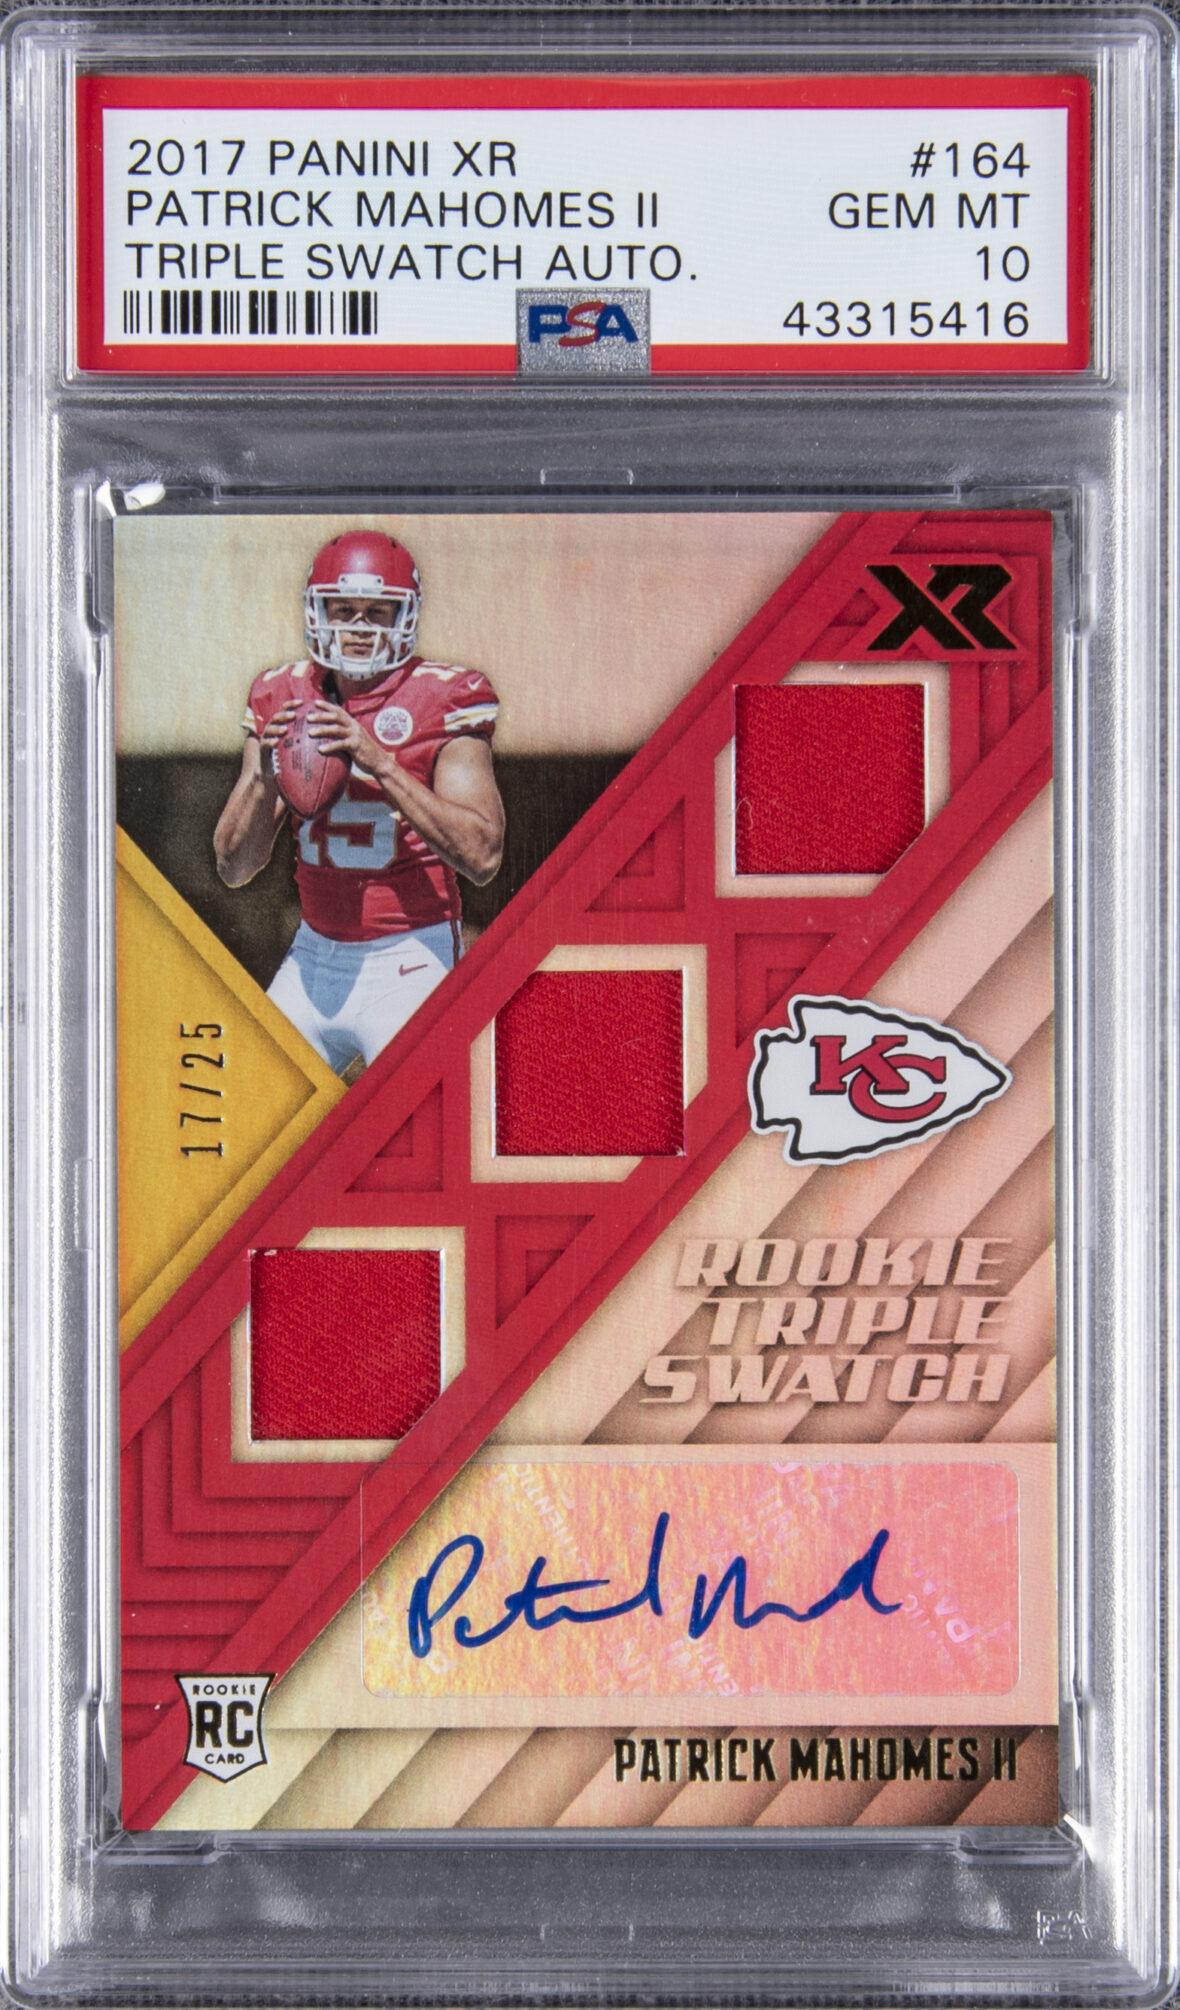 Most valuable Patrick Mahomes rookie cards: 2017 Panini XR #164